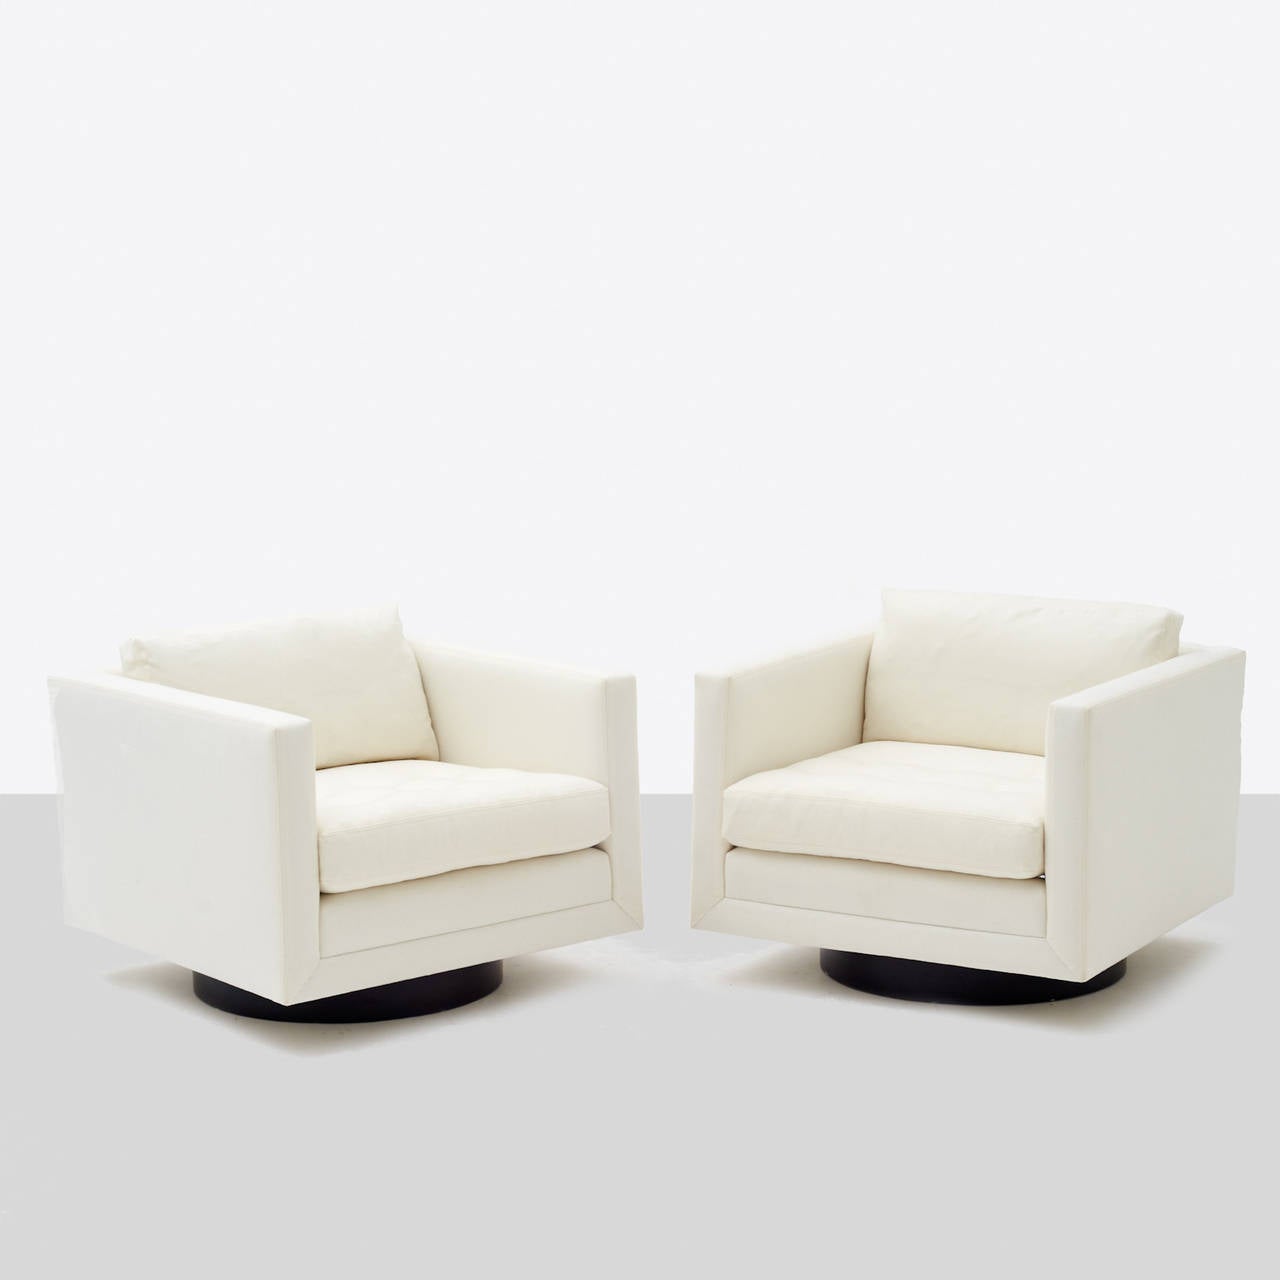 A pair of Tuxedo lounge chairs by Harvey Probber. Newly restored in a soft white wool and down cushions. Swiveling walnut base.